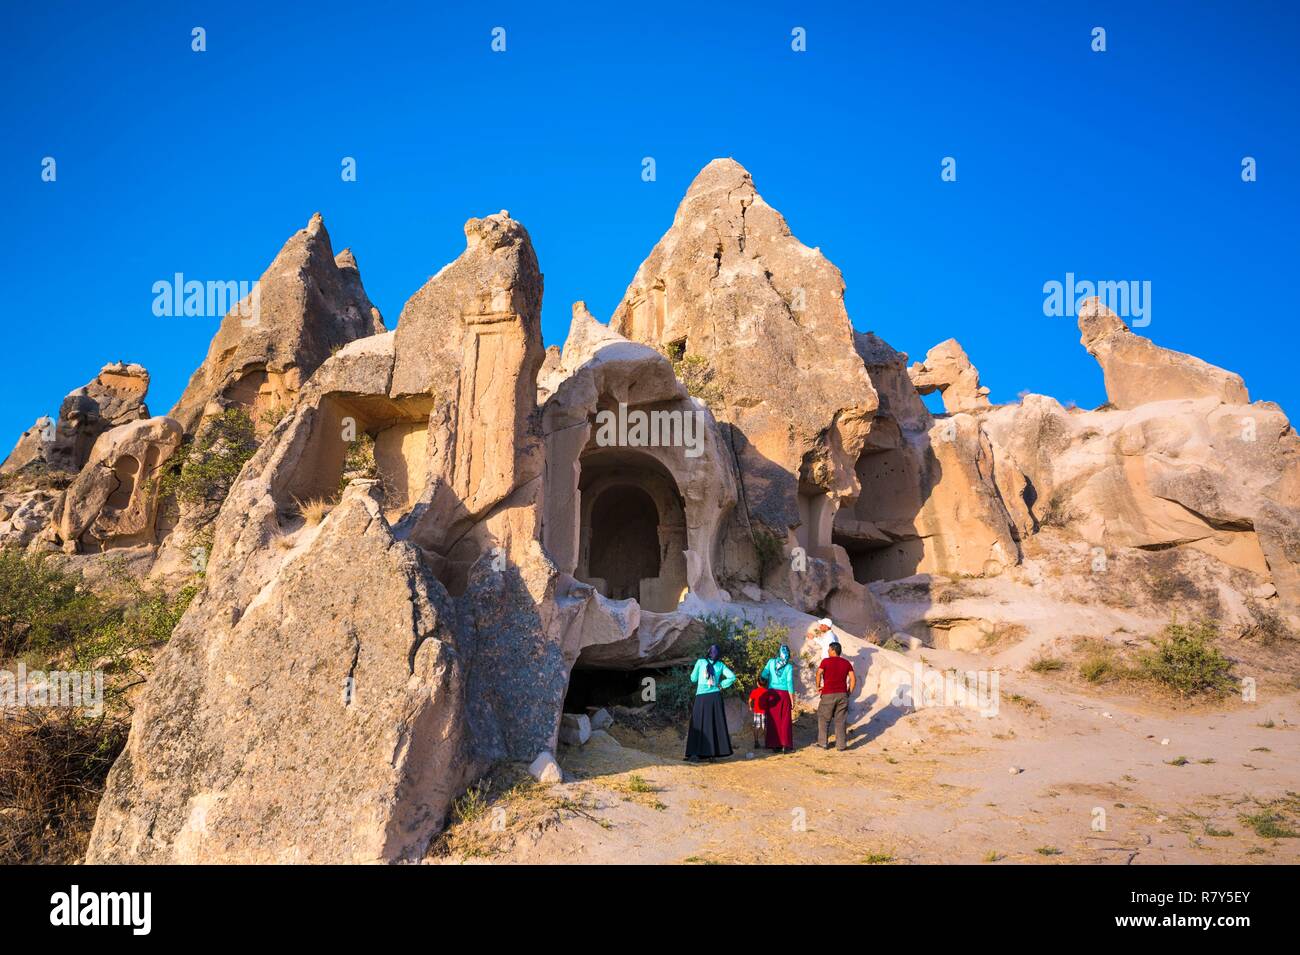 Turkey, Central Anatolia, Nev&#x15f;ehir province, Cappadocia UNESCO World Heritage Site, Göreme, a Turkish family discovers the iconic landscape of the volcanic tuff hills and remains of troglodyte dwellings in Göreme National Park Stock Photo